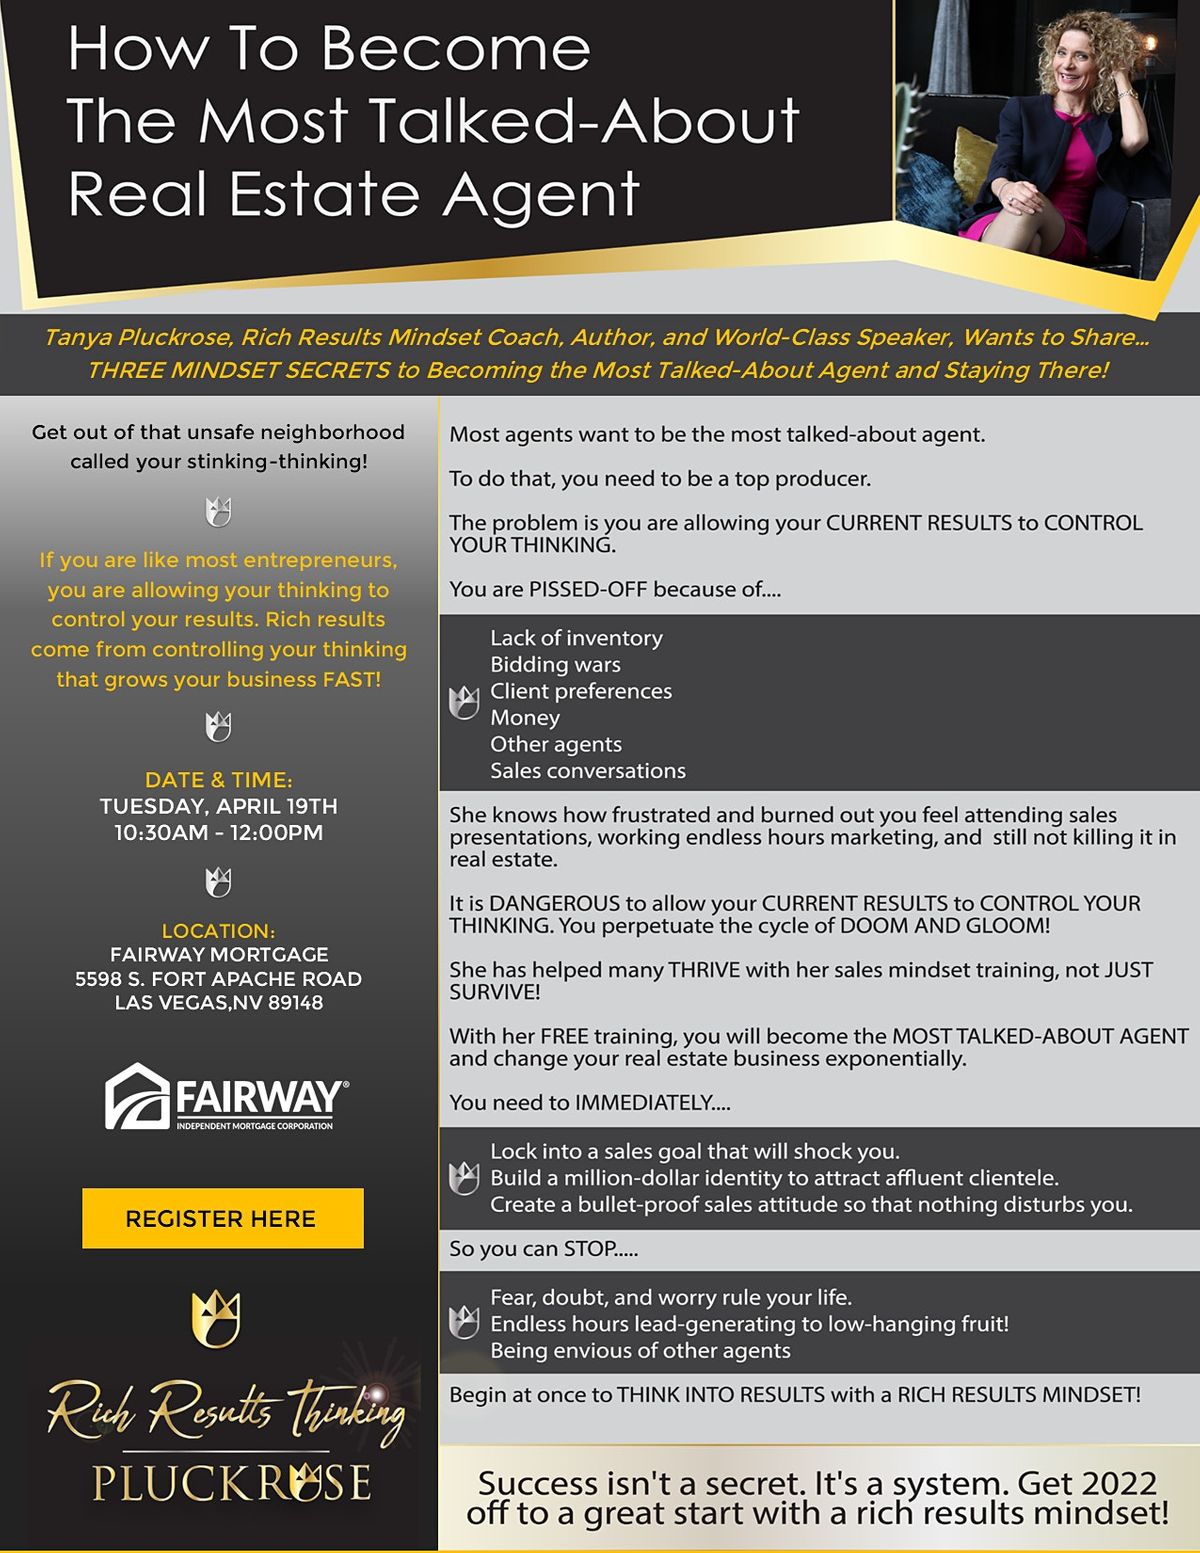 How to Become the Most Talked-About Real Estate Agent